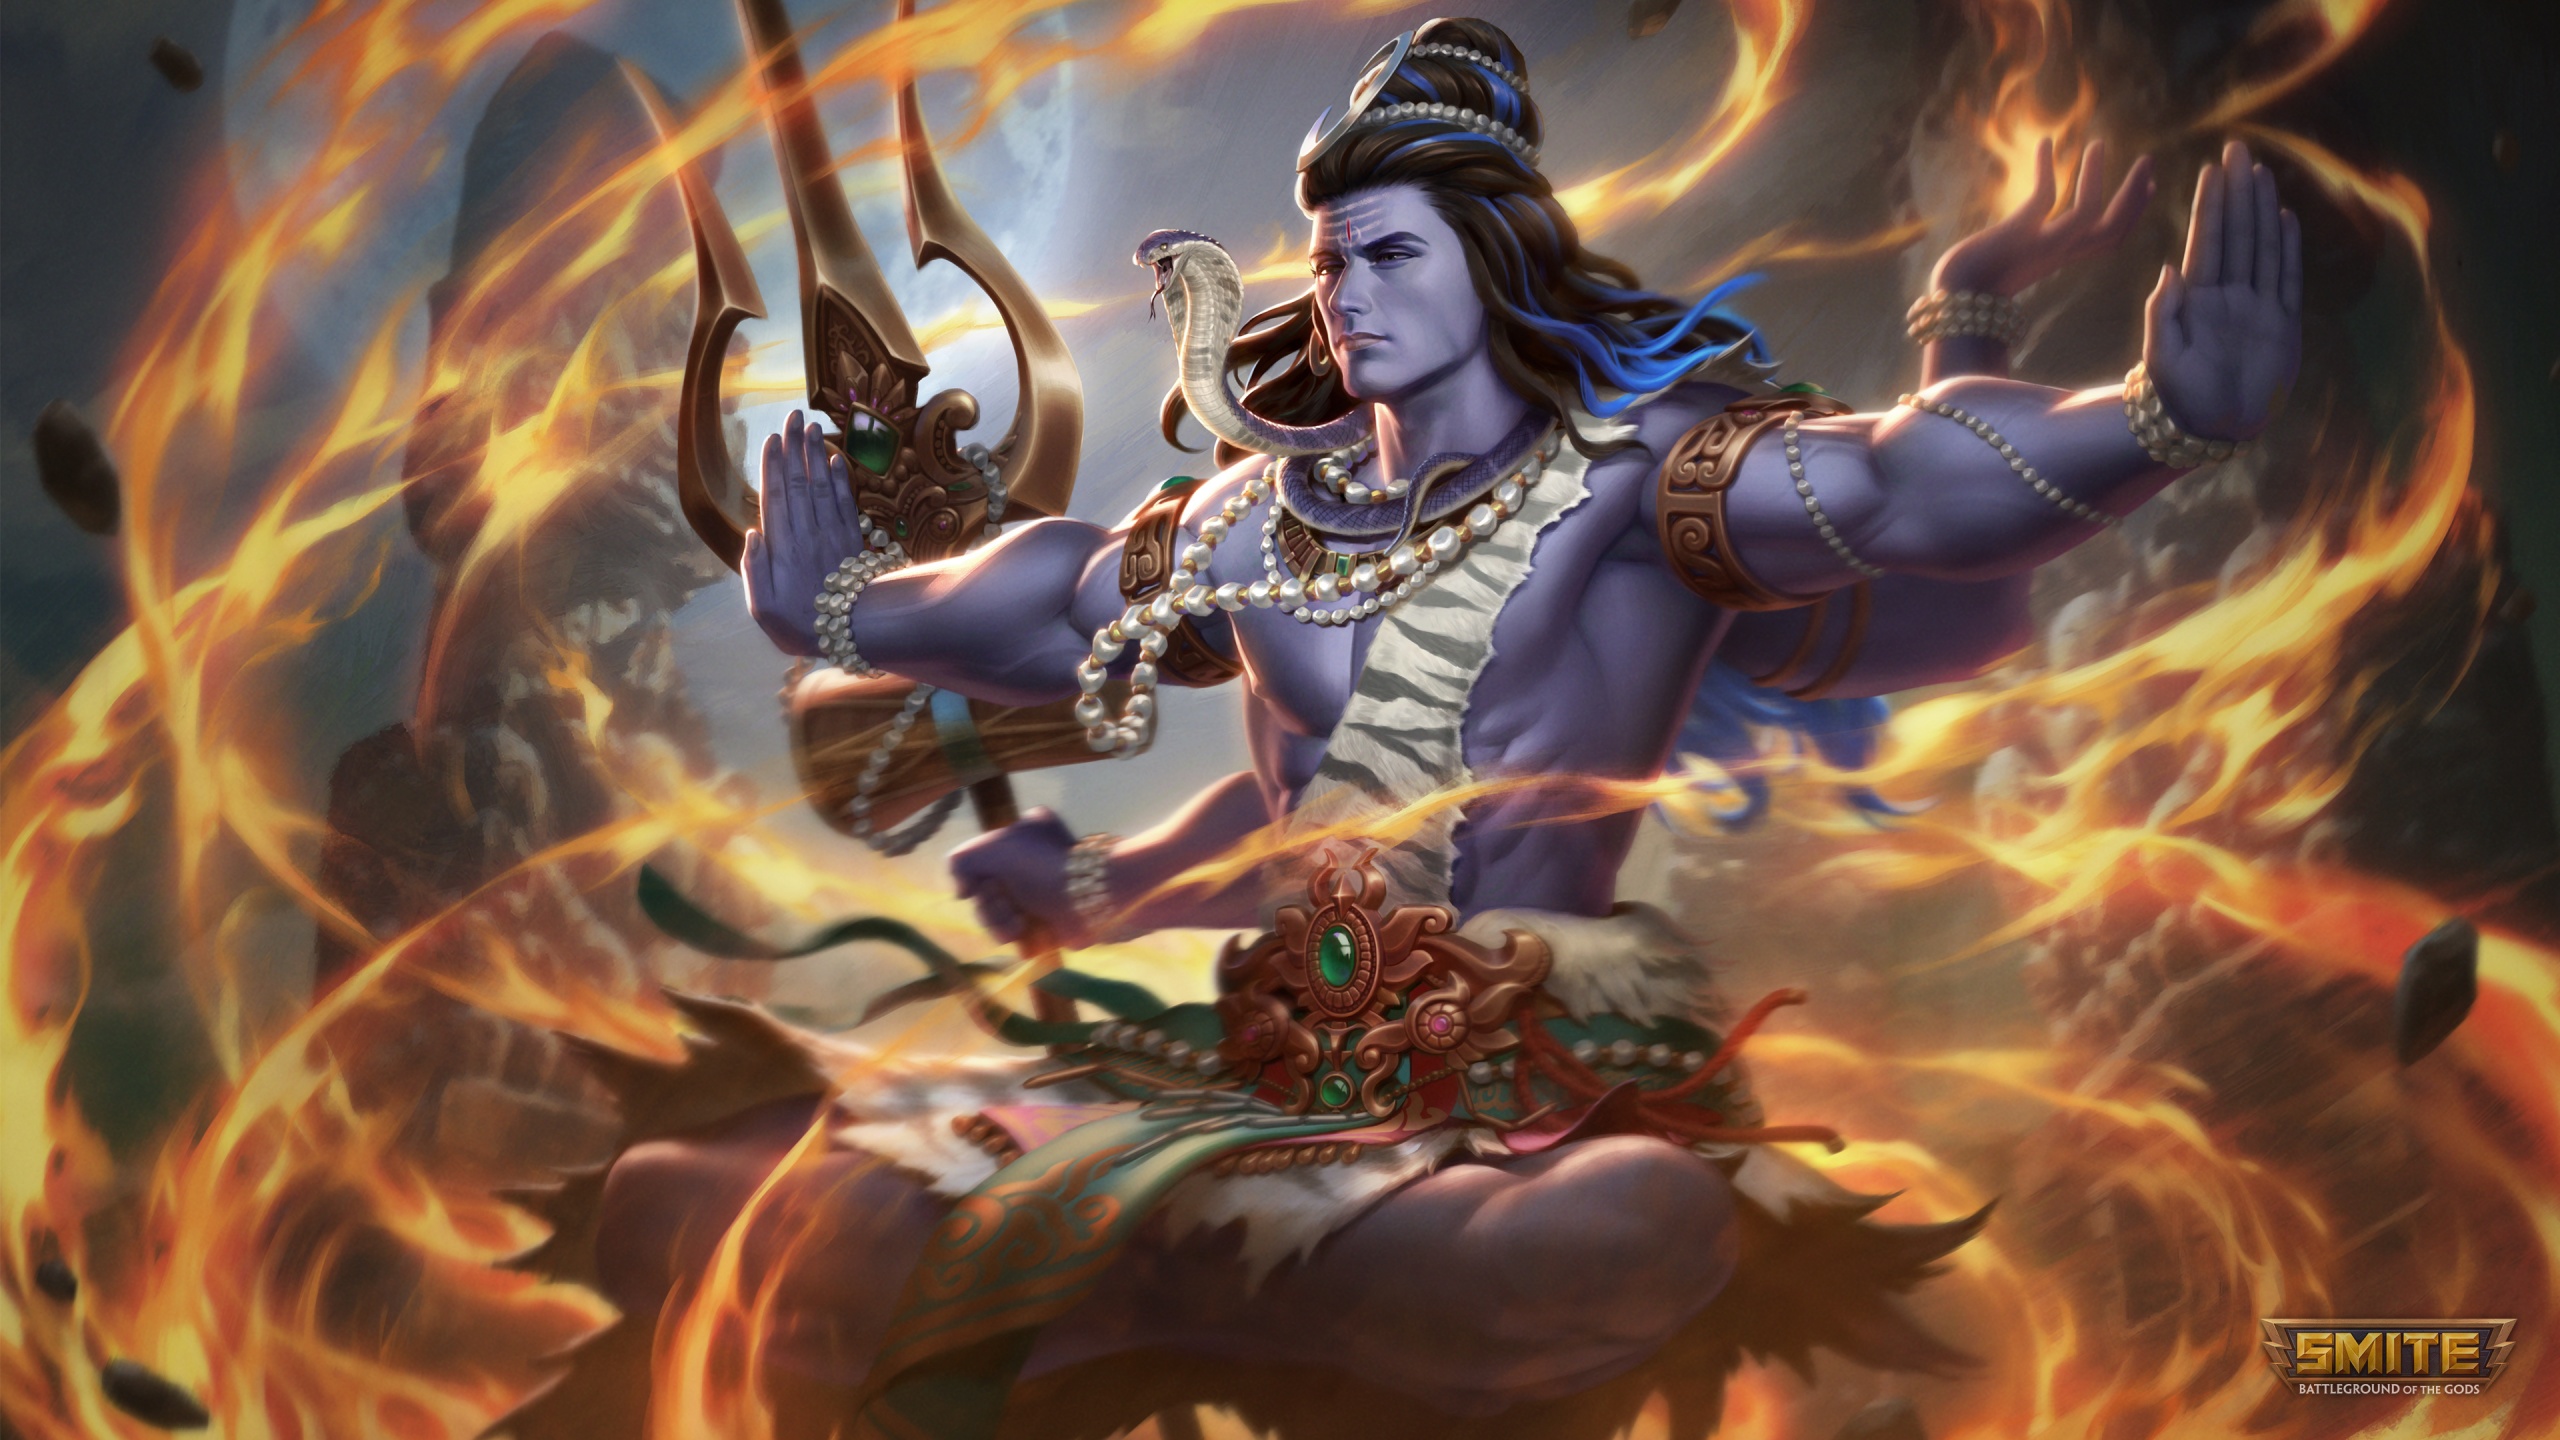 Lord Shiva Wallpaper 4K, The Destroyer, Smite, Games, #7301